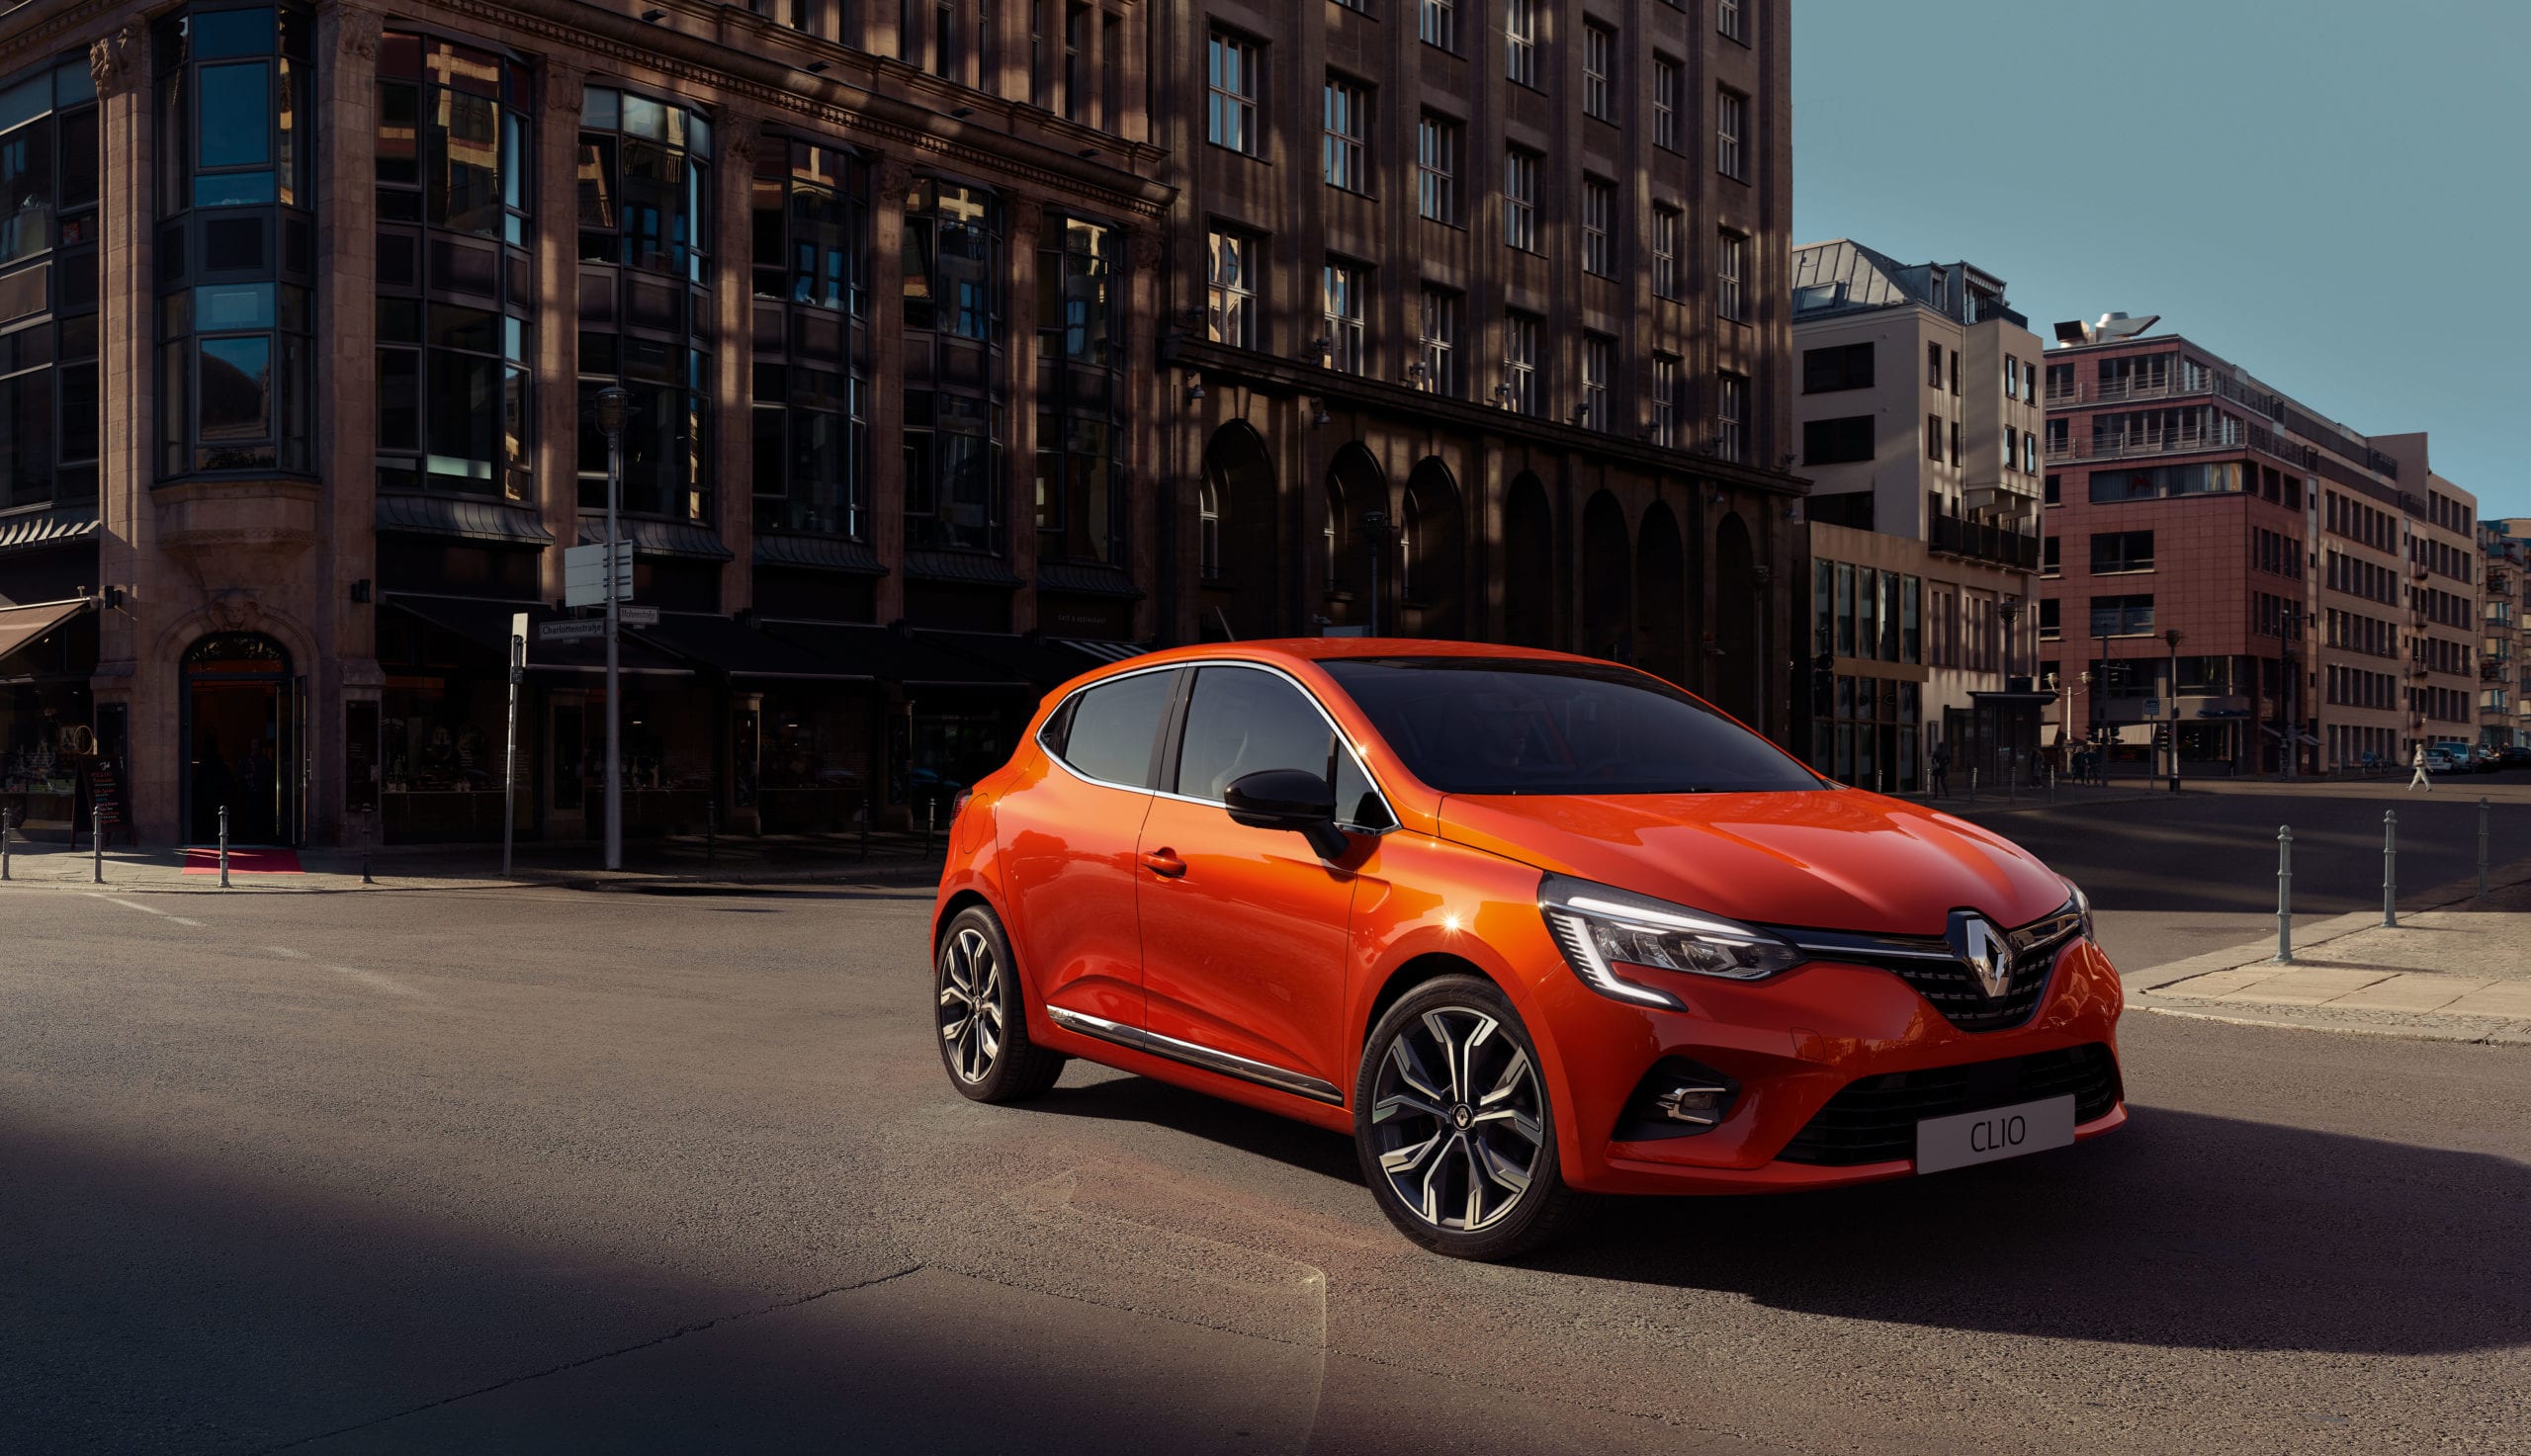 https://www.firstcar.co.uk/wp-content/uploads/2021/04/LEAD-All-NewRenaultClio-EMBARGO29011909h00UKtime2-scaled.jpg